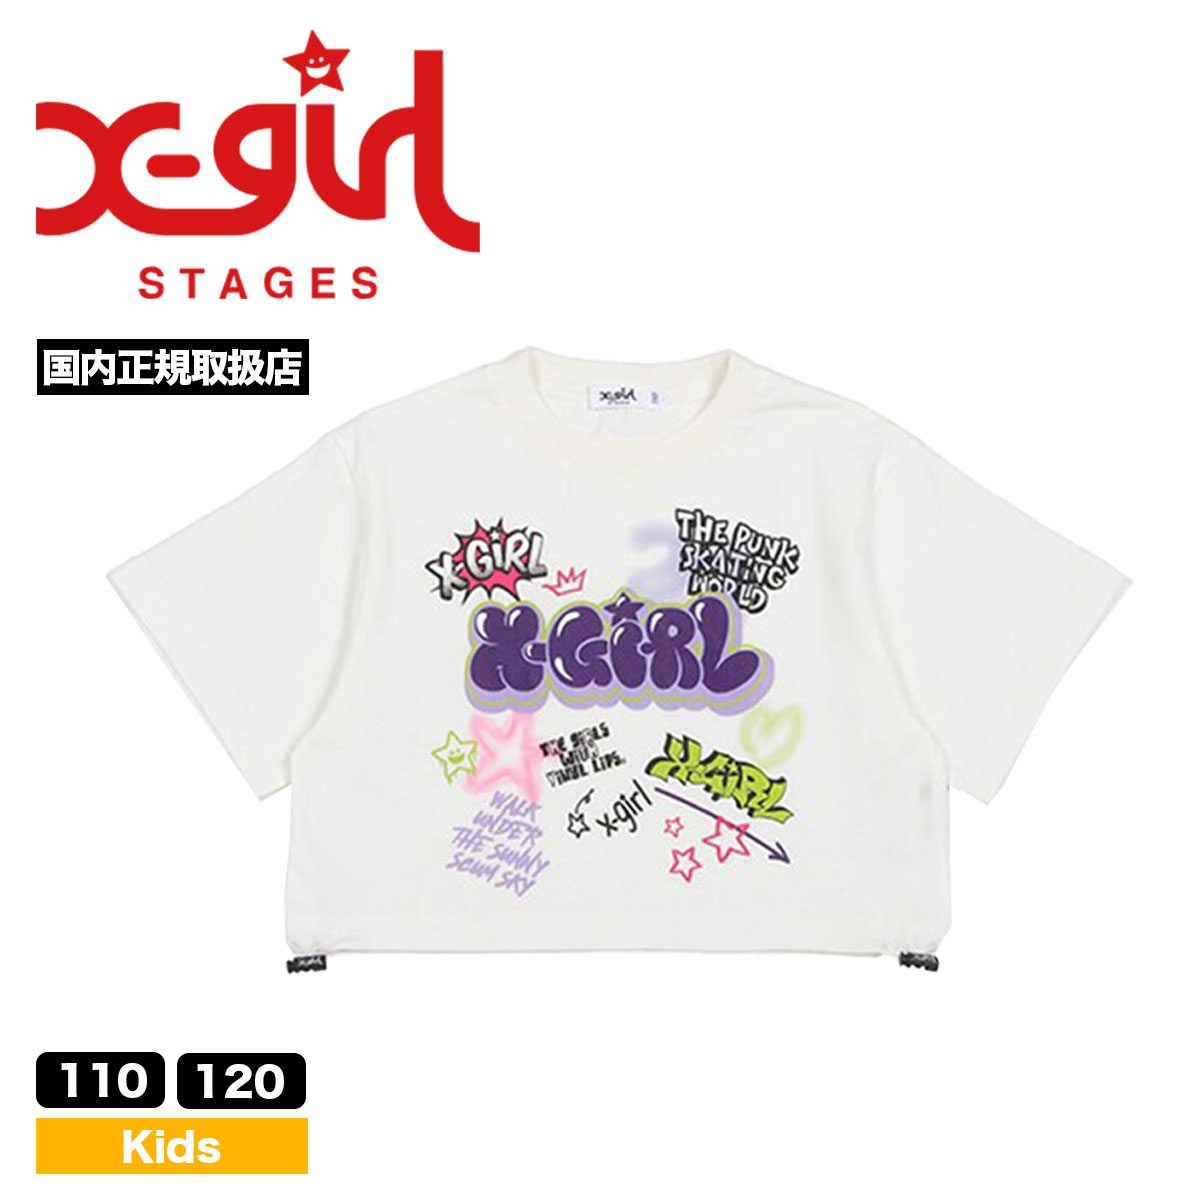 xgirl stages エックスガールステージス 半袖 Tシャツ トップス 全2色 110 120...